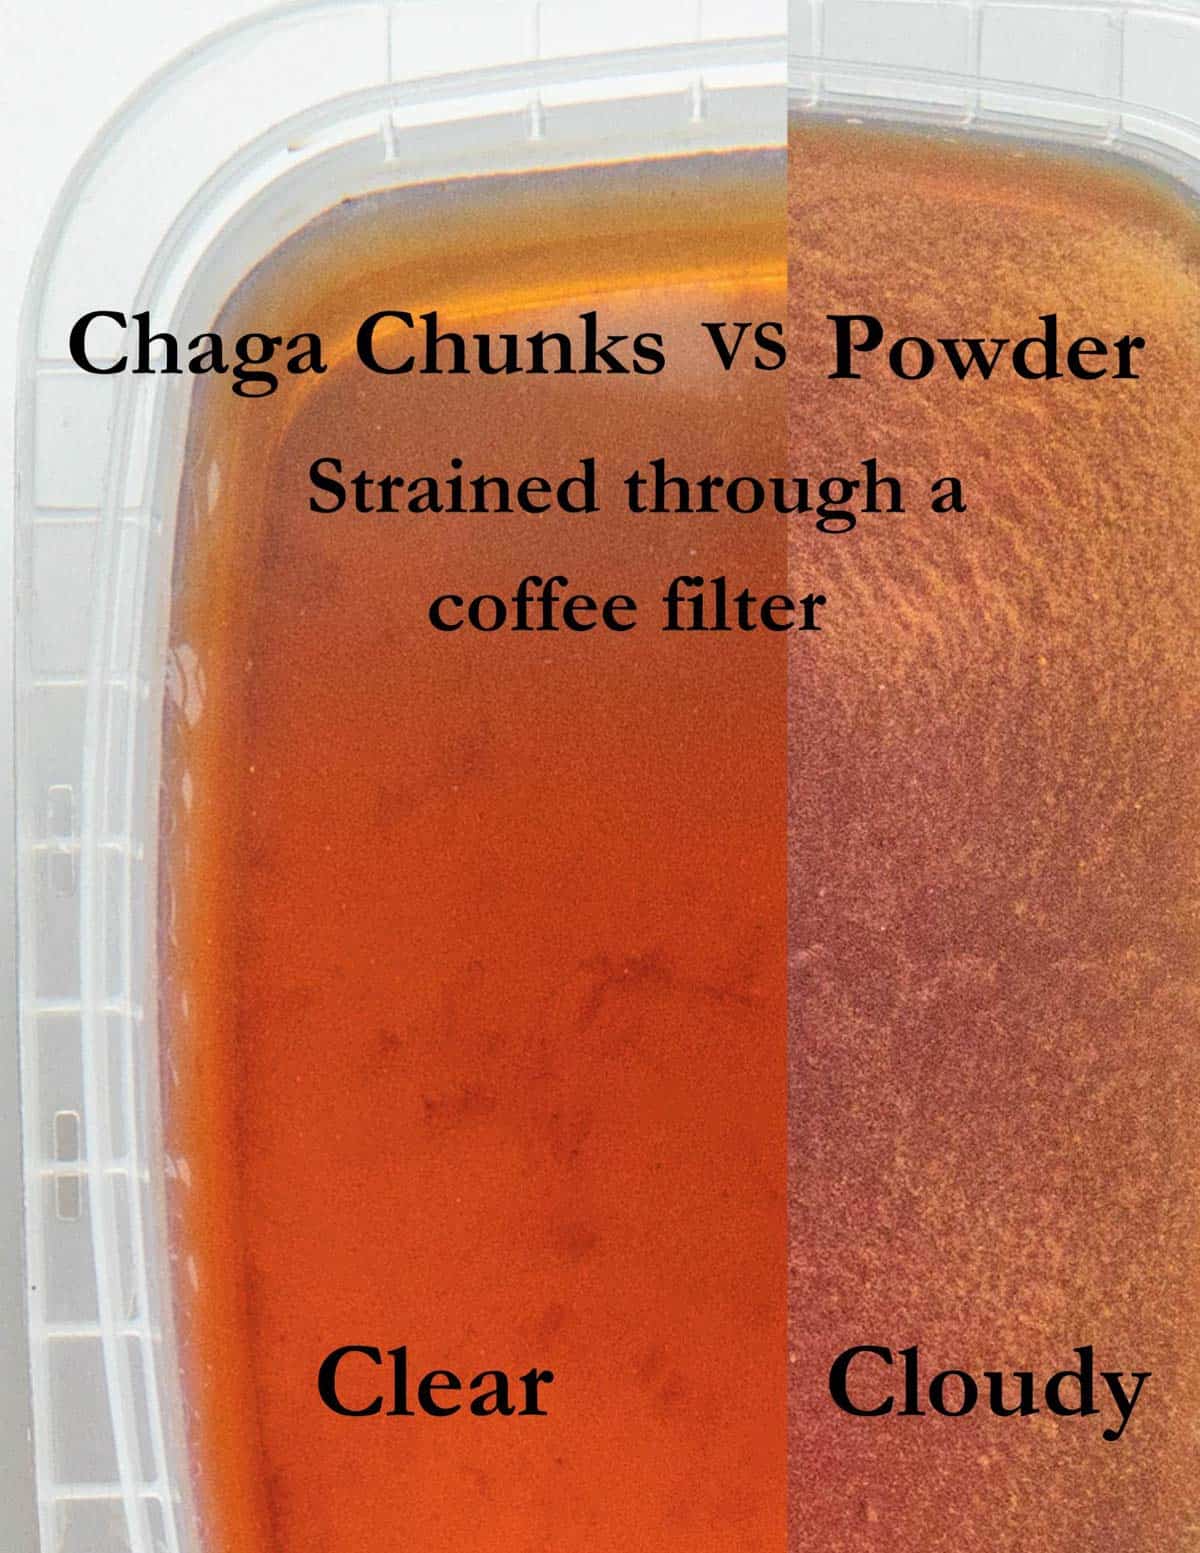 An infographic showing two types of chaga tea side by side. One made with powder that looks cloudy, the other made by brewing chunks, which is clear.